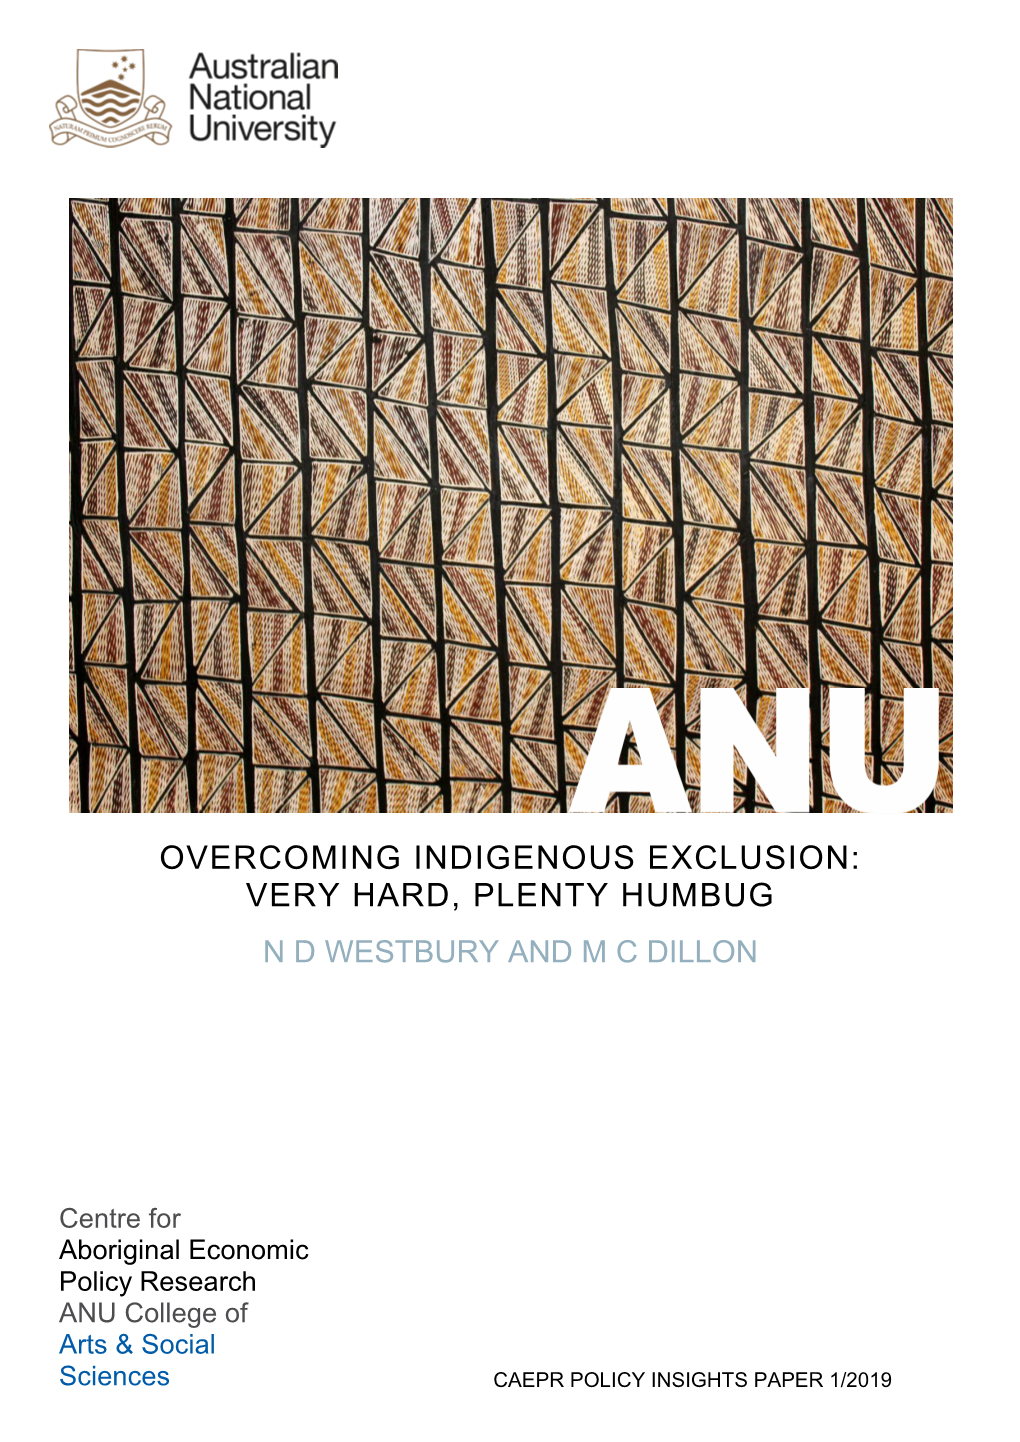 Overcoming Indigenous Exclusion: Very Hard, Plenty Humbug N D Westbury and M C Dillon